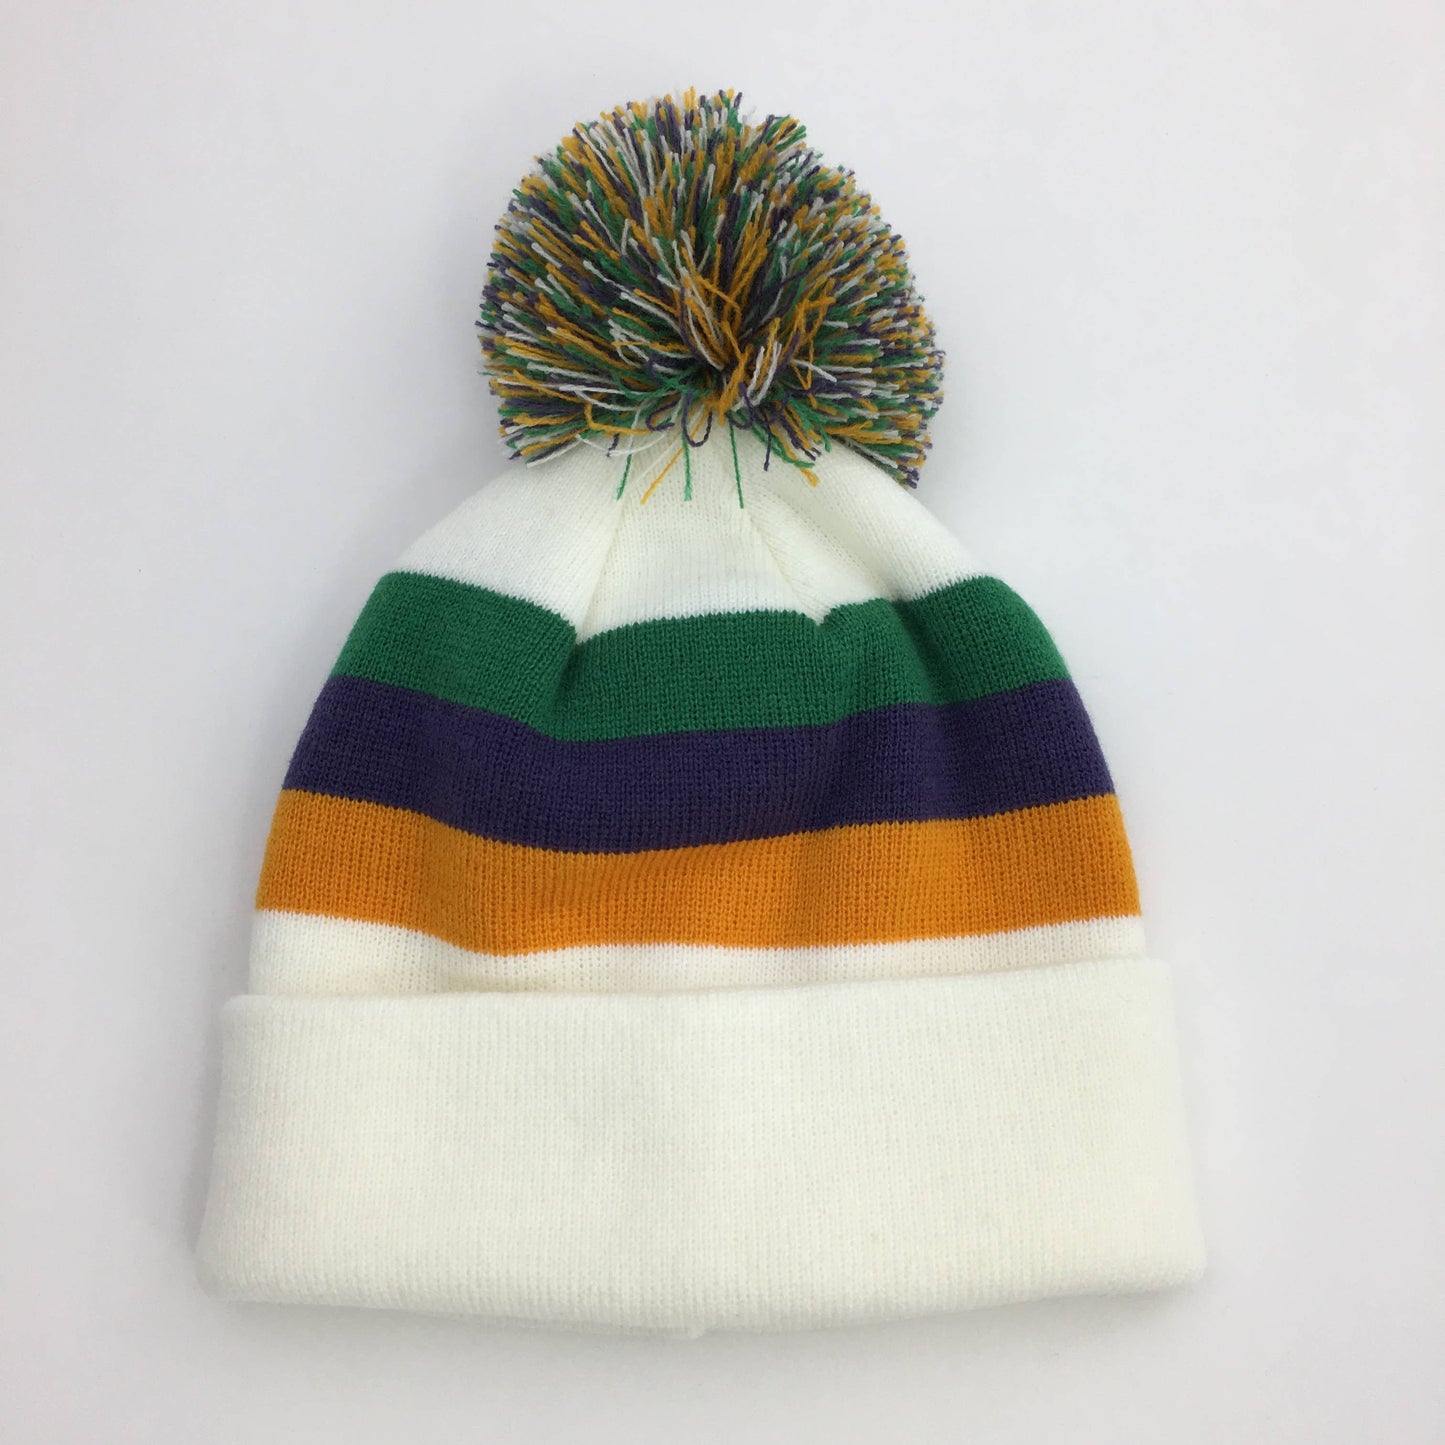 A SongLily Mardi Gras striped beanie hat with a pompom, perfect for Mardi Gras festivities.